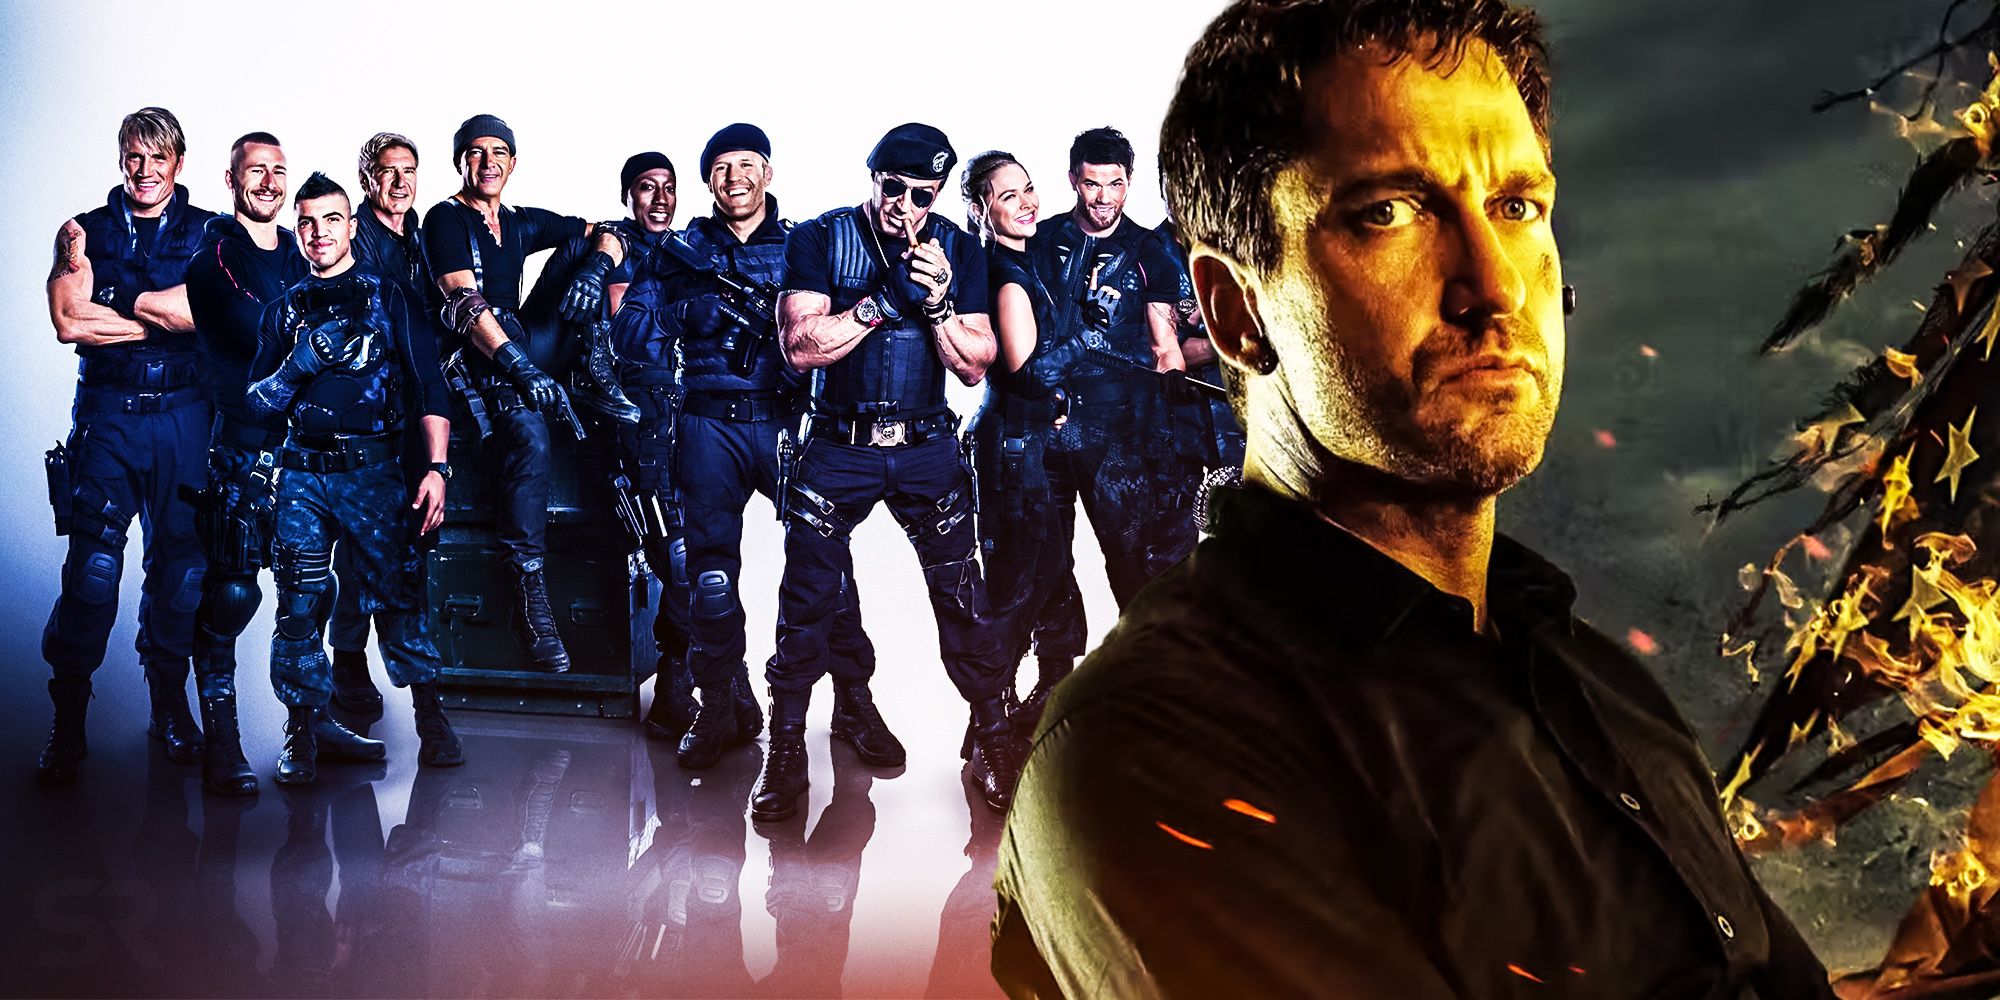 Fallen movies set up expendables crossover gerard butler mike banning